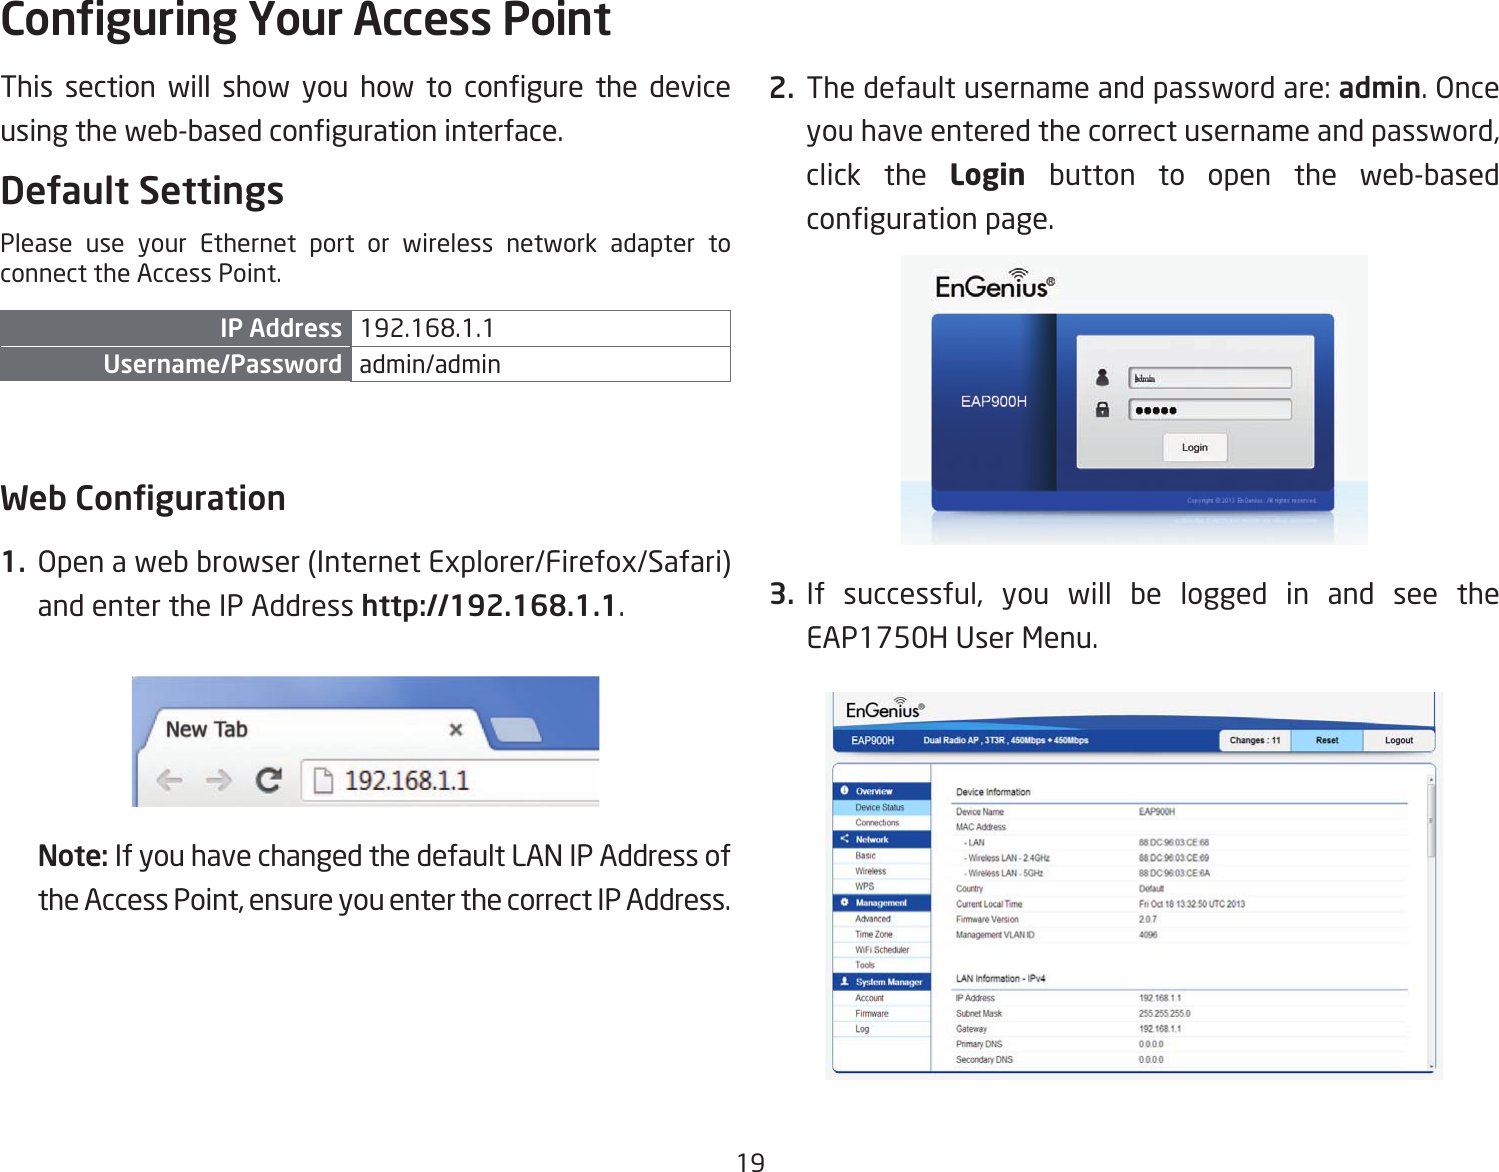 19This section will show you how to congure the deviceusingtheweb-basedcongurationinterface.Default SettingsPlease use your Ethernet port or wireless network adapter to connect the Access Point.IP Address 192.168.1.1Username/Password admin/admin Web Conguration1.  Open a web browser (Internet Explorer/Firefox/Safari) and enter the IP Address http://192.168.1.1.Note: If you have changed the default LAN IP Address of the Access Point, ensure you enter the correct IP Address.2. Thedefaultusernameandpasswordare:admin. Once you have entered the correct username and password, click the Login  button to open the web-based congurationpage.3. If successful, you will be logged in and see the EAP1750H User Menu.Conguring Your Access Point